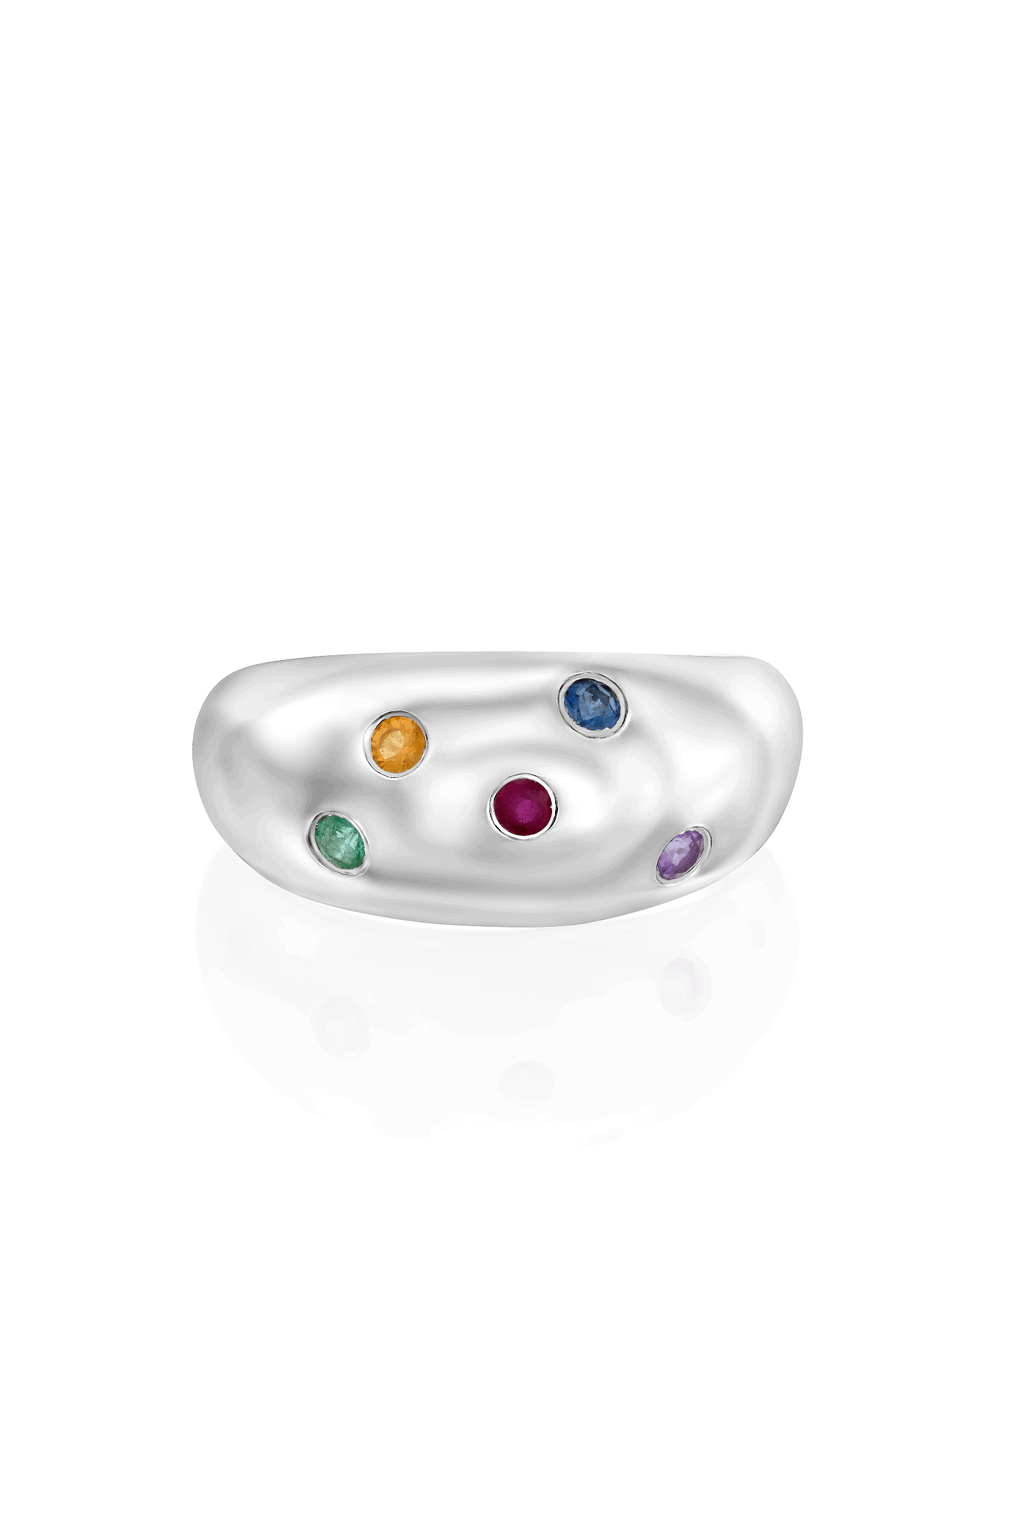 AFTER PARTY RING - 925 SILVER & GEMS